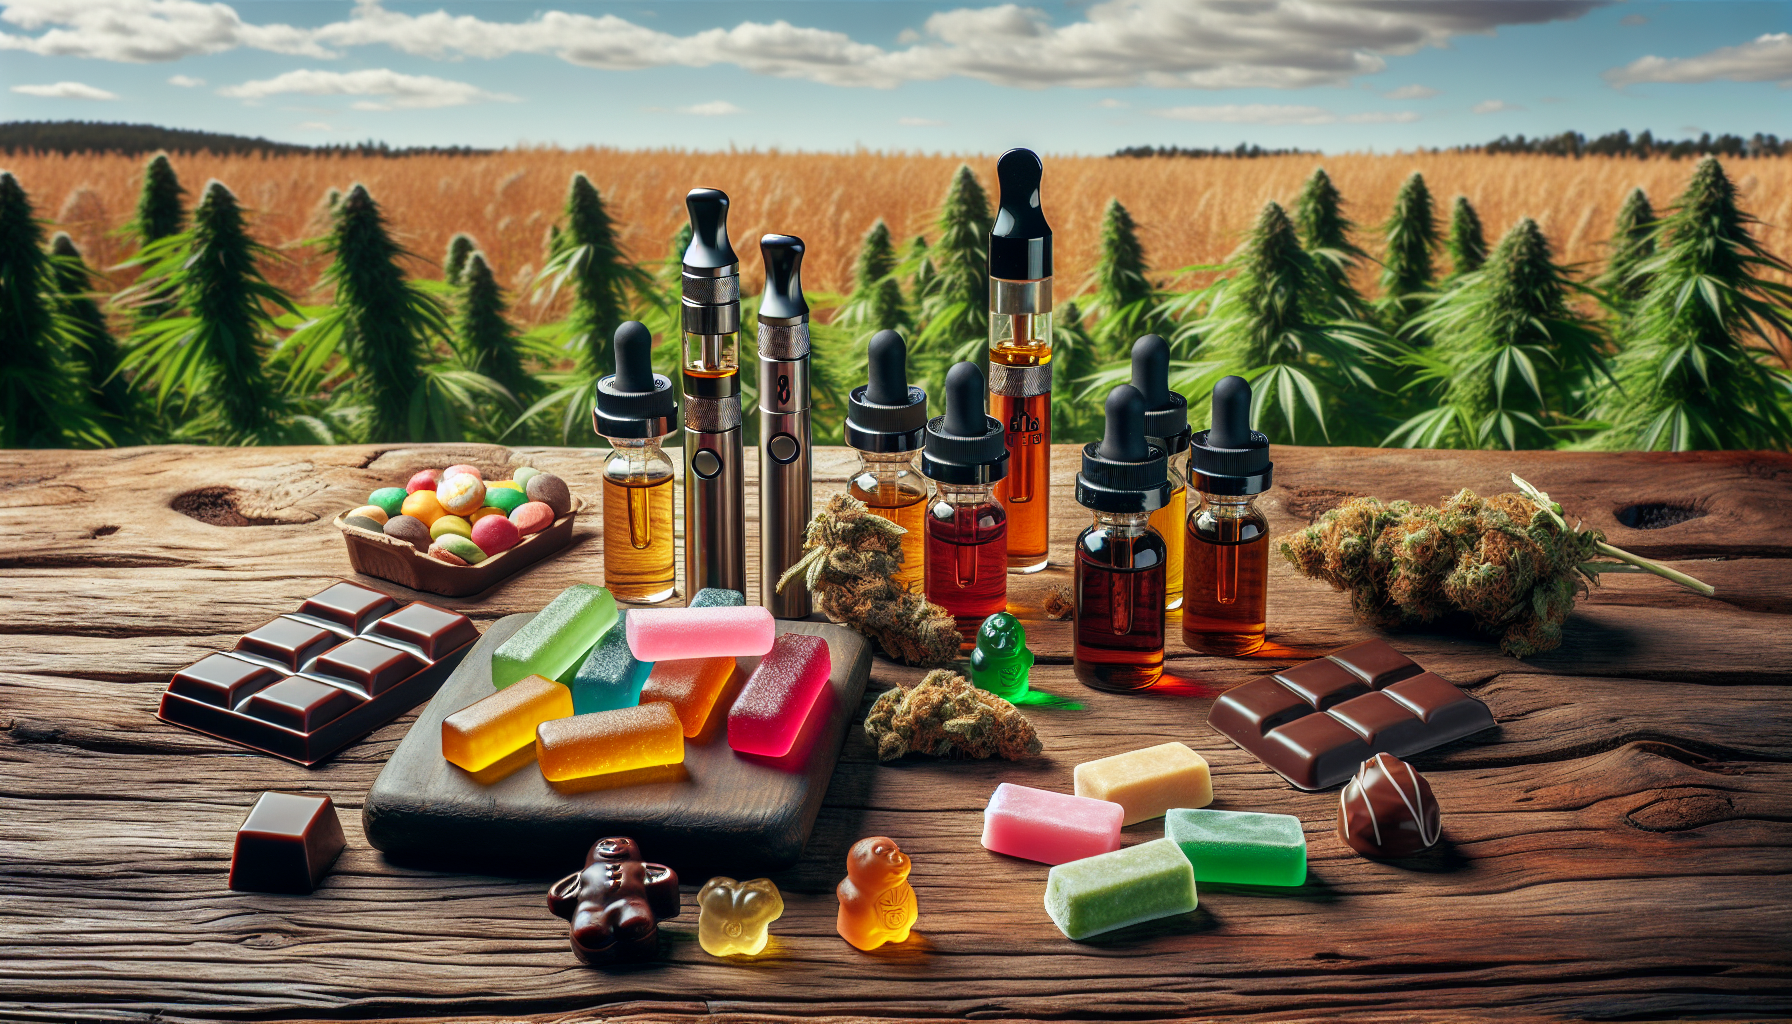 Various Delta 8 THC products including vape cartridges, edibles, and tinctures